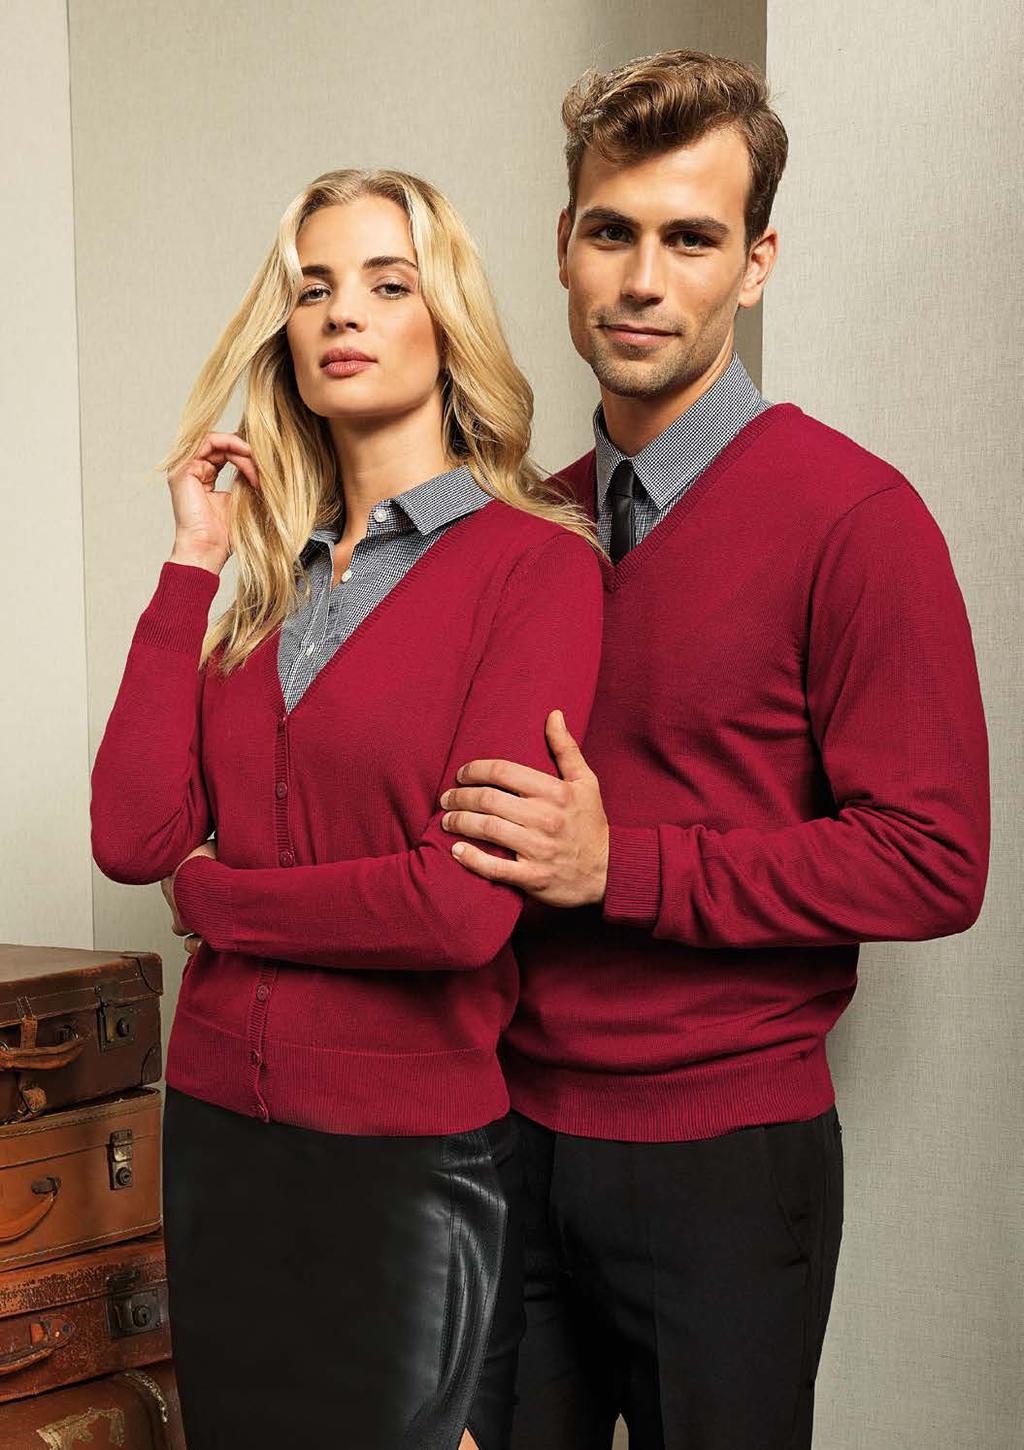 GET KNITTED OUT HIS AND HERS STYLING Men s V-Neck Knitted Sweater PR694 PR694 Cotton rich long sleeve sweater V-neck styling Fine gauge knit